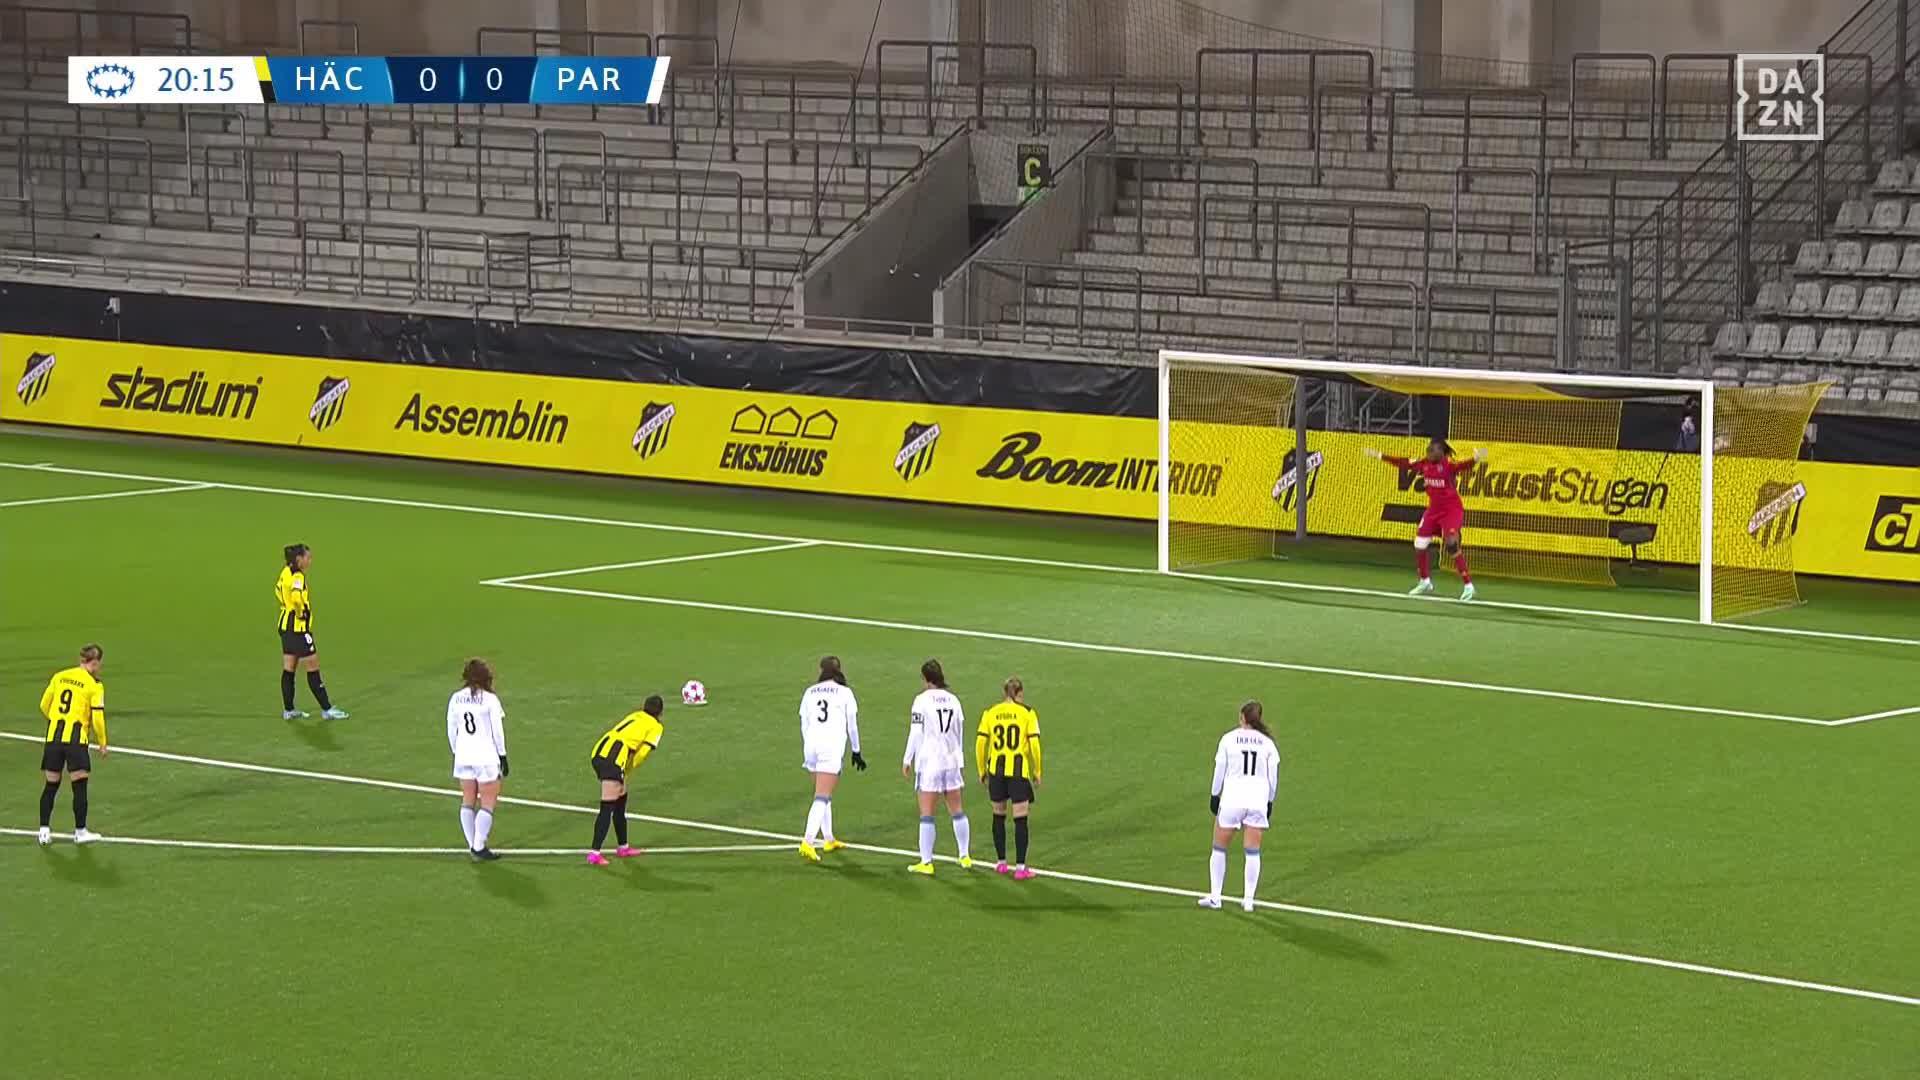 Chiamaka Cynthia Nnadozie... remember the name! 👀 What a save to deny the BK Häcken penalty.Watch LIVE 📺  highlights on YouTube 👉  #NewDealforWomensFootball